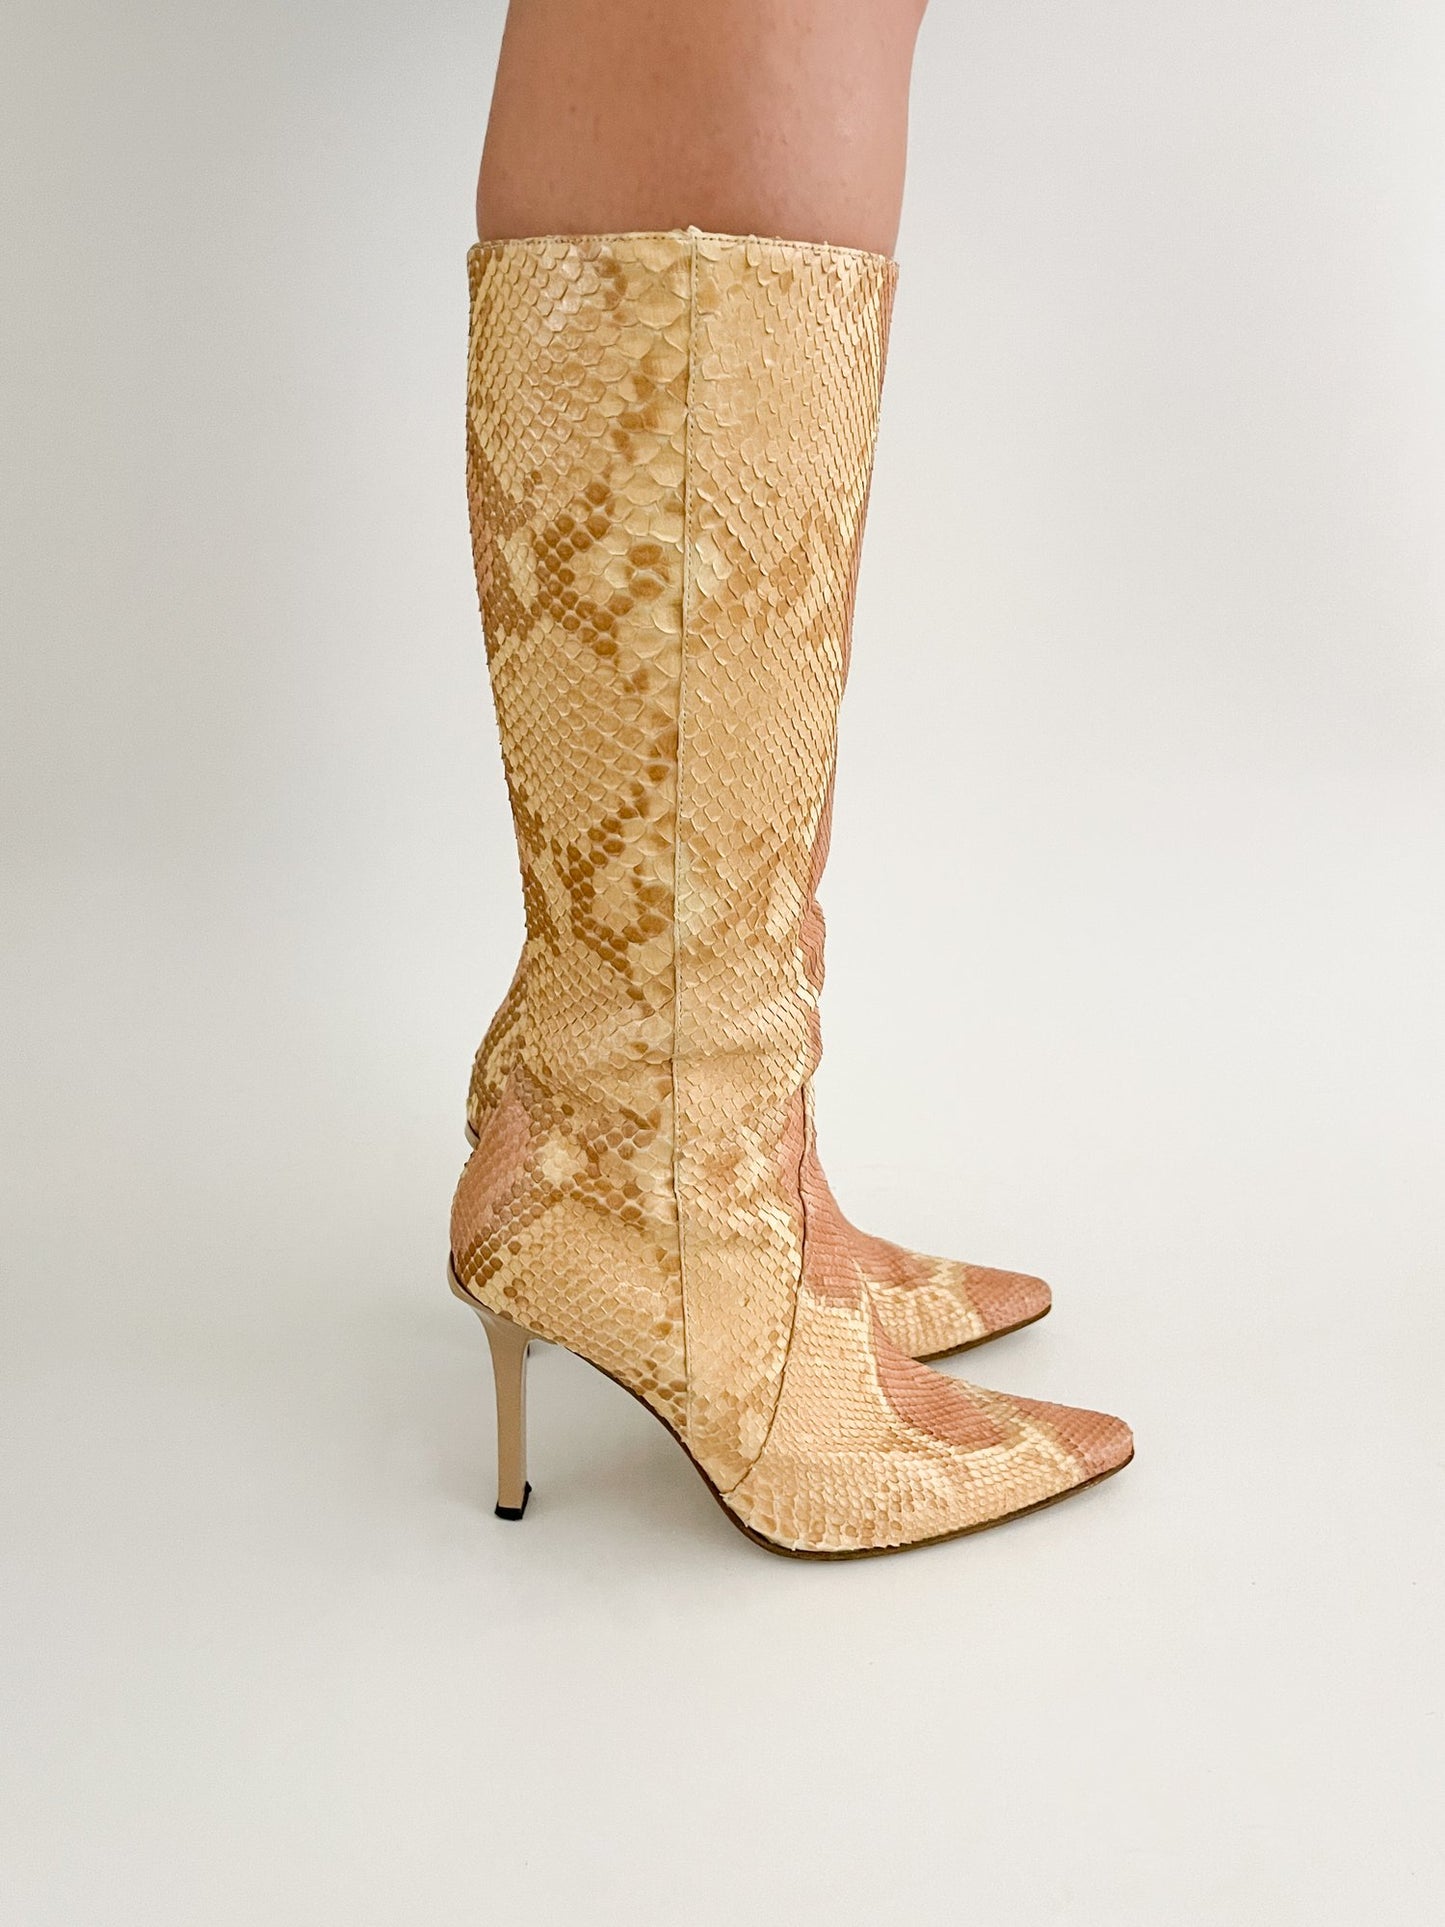 Vintage Casadei snake skin knee high boots as seen on Sex and the city